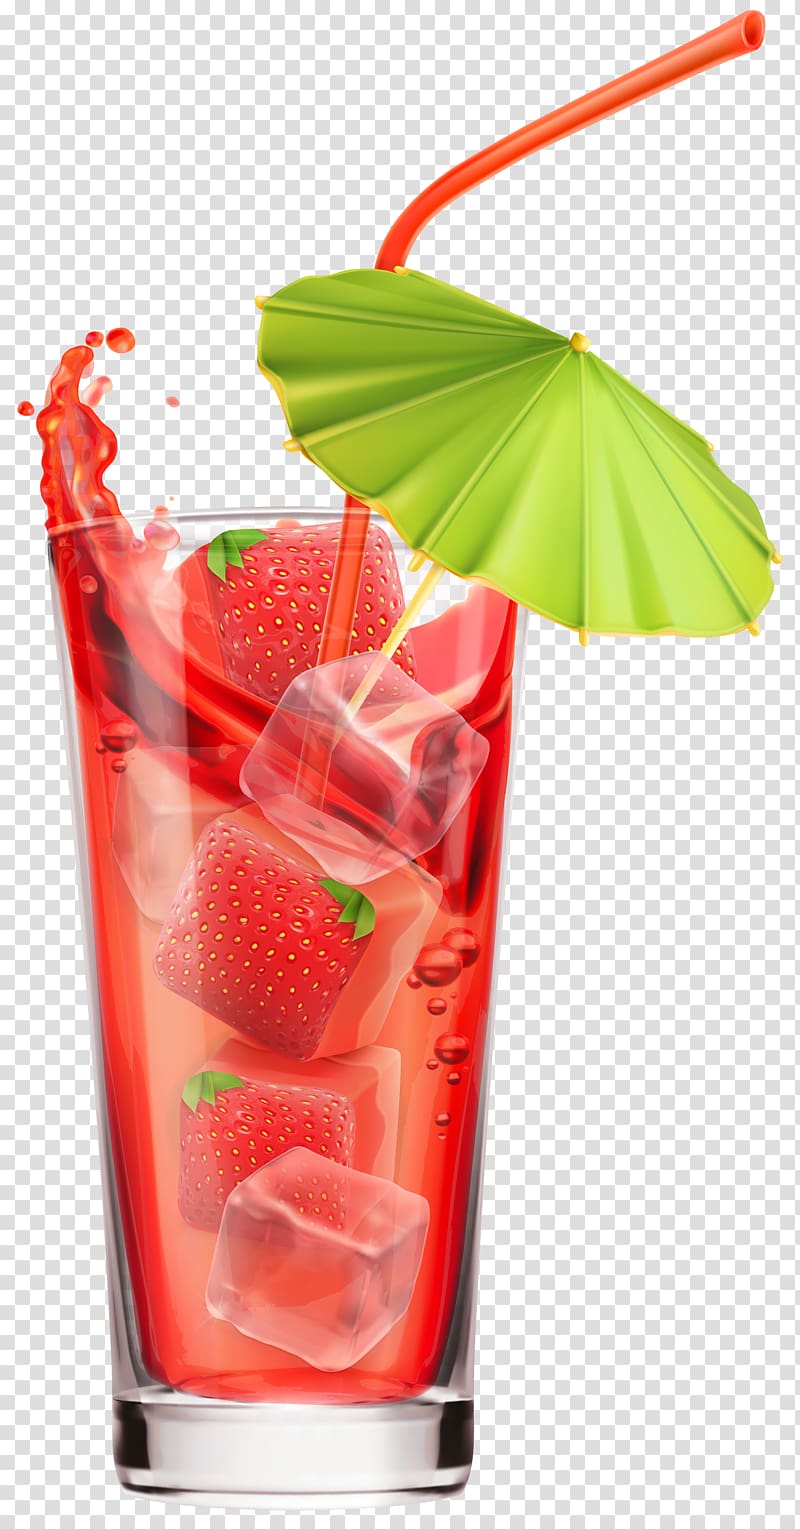 Cocktail Old Fashioned Drink Icon, Strawberry Cocktail , red beverage on highball glass transparent background PNG clipart